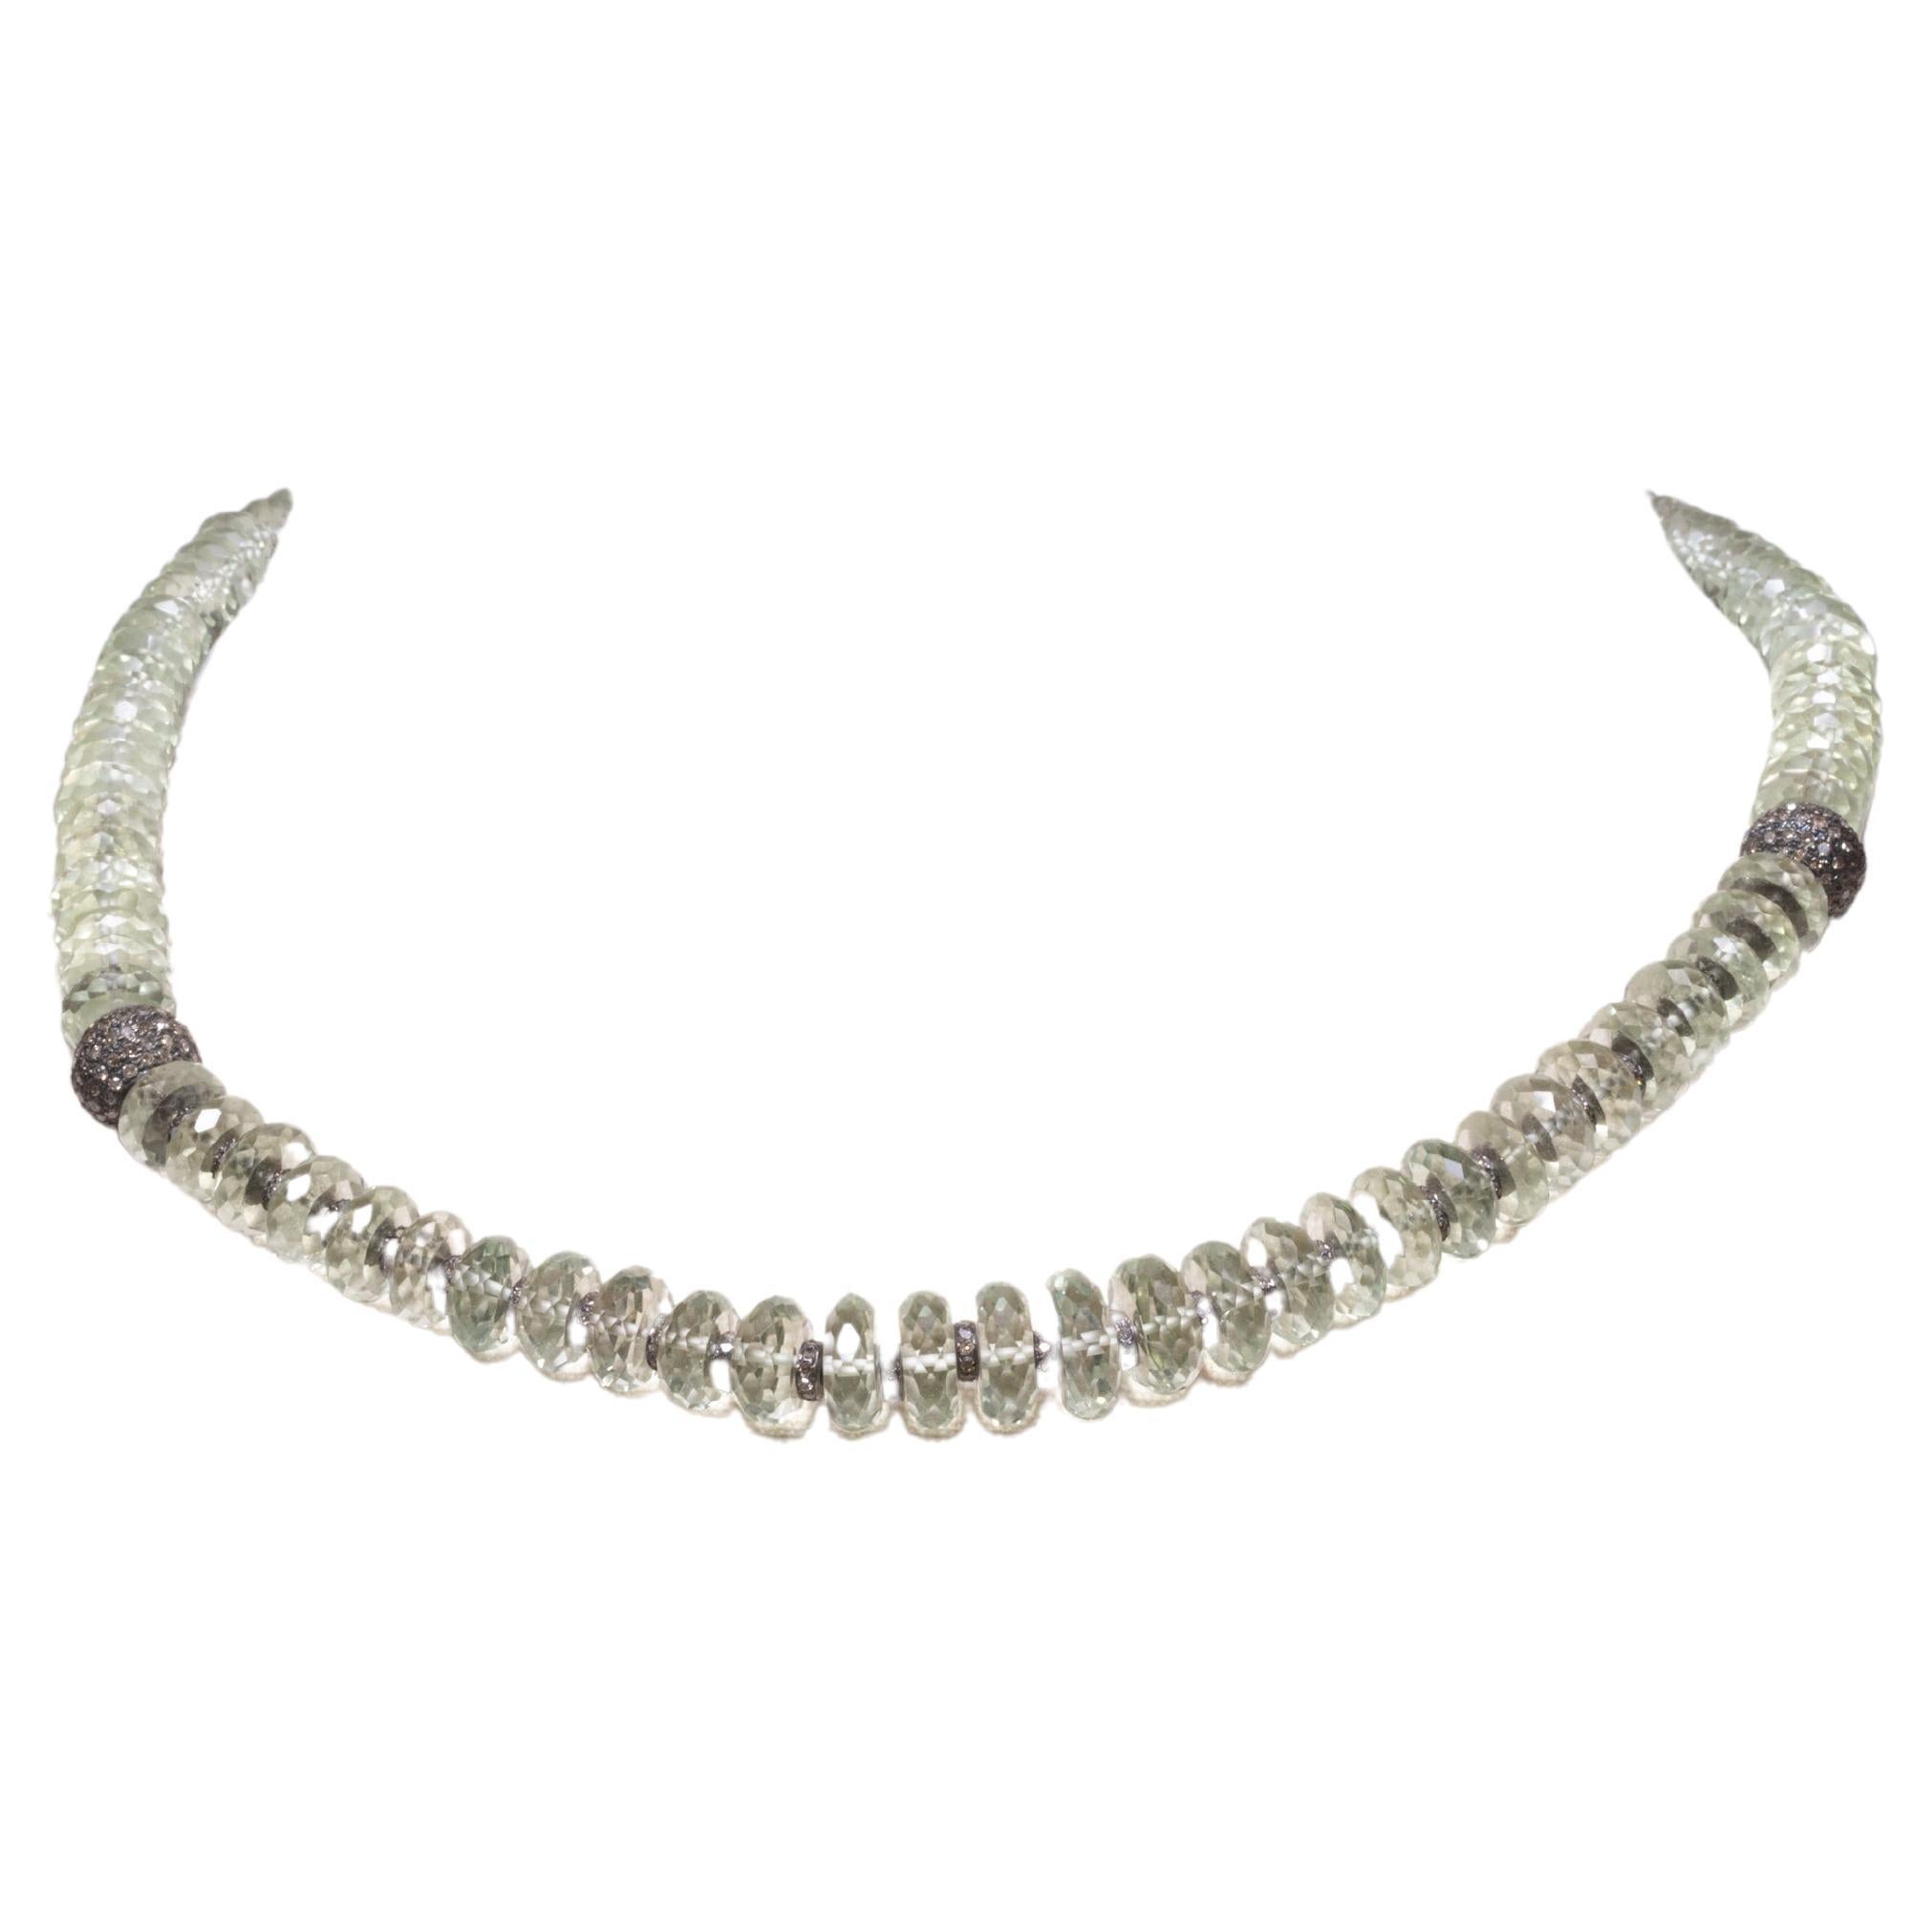 Faceted Prasiolite 'Green Amethyst' and Diamond Necklace